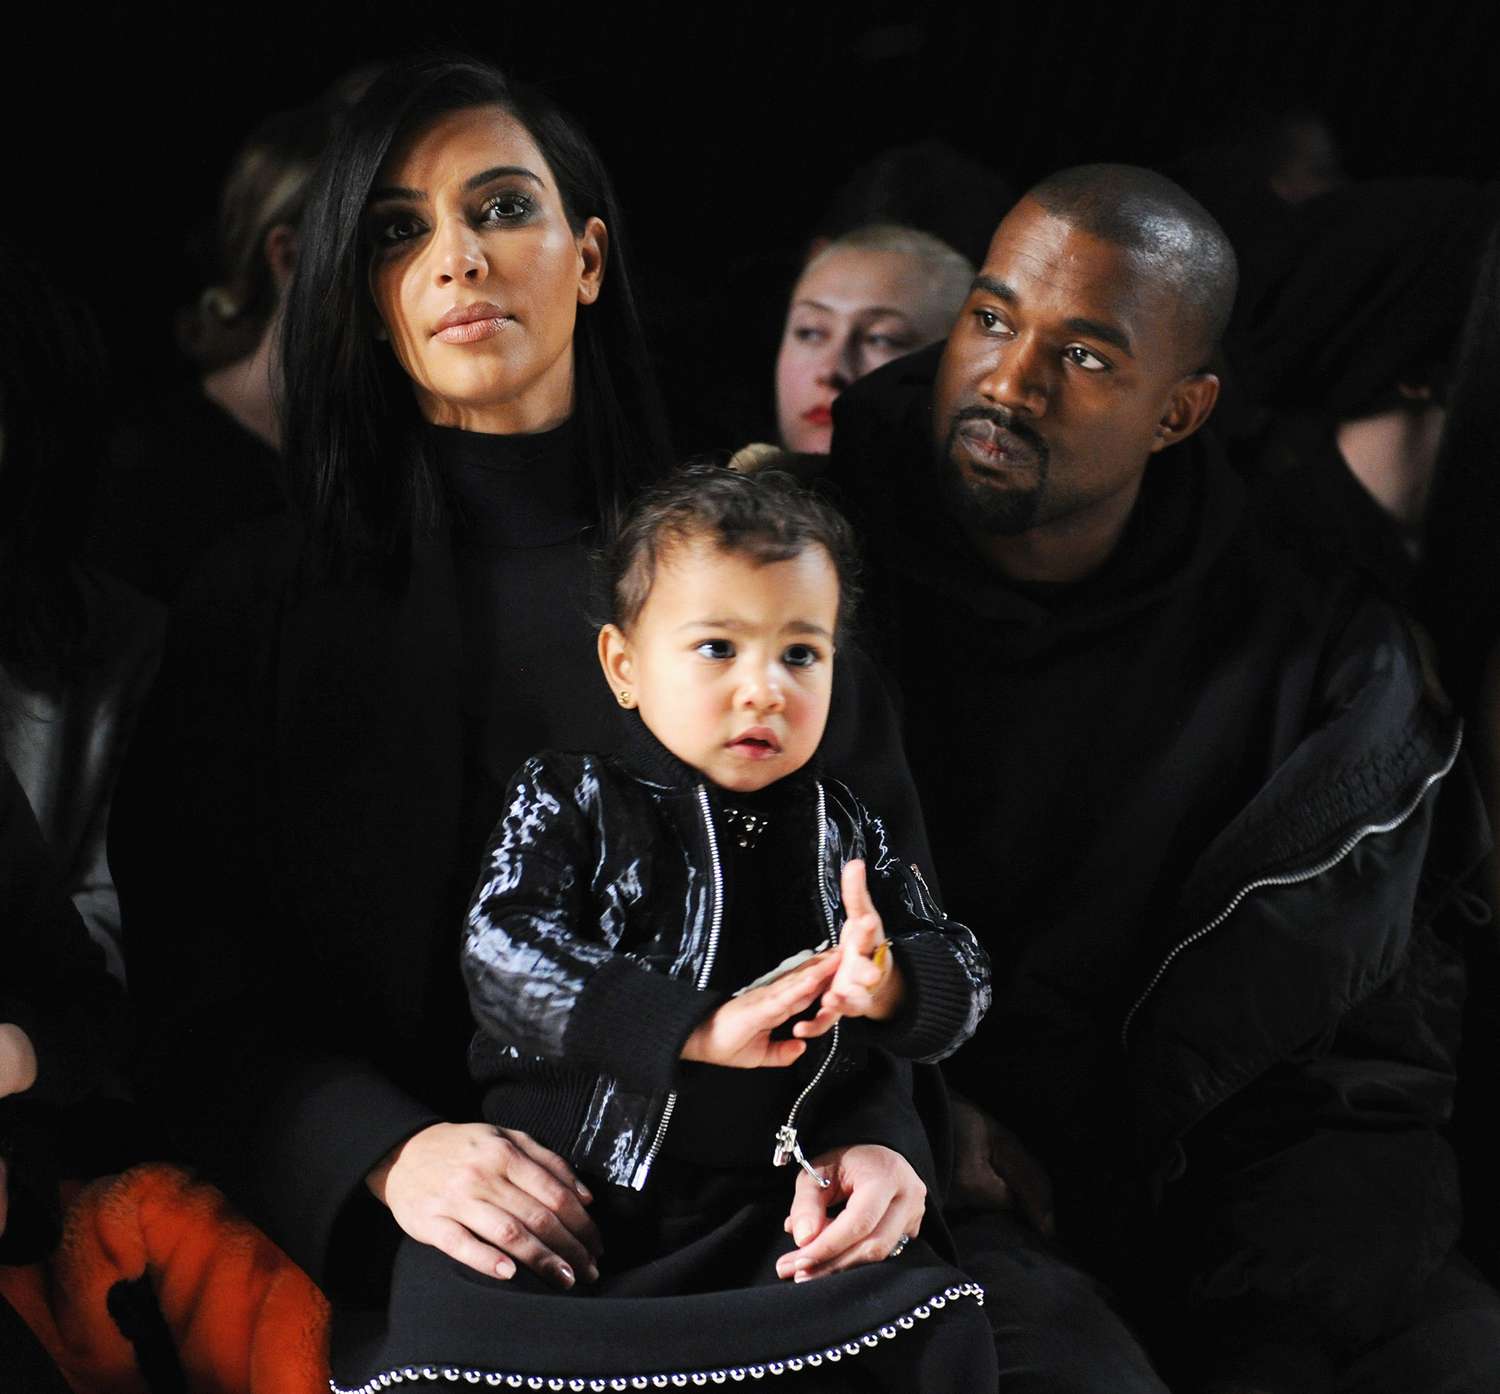 A History of North West at Fashion Week